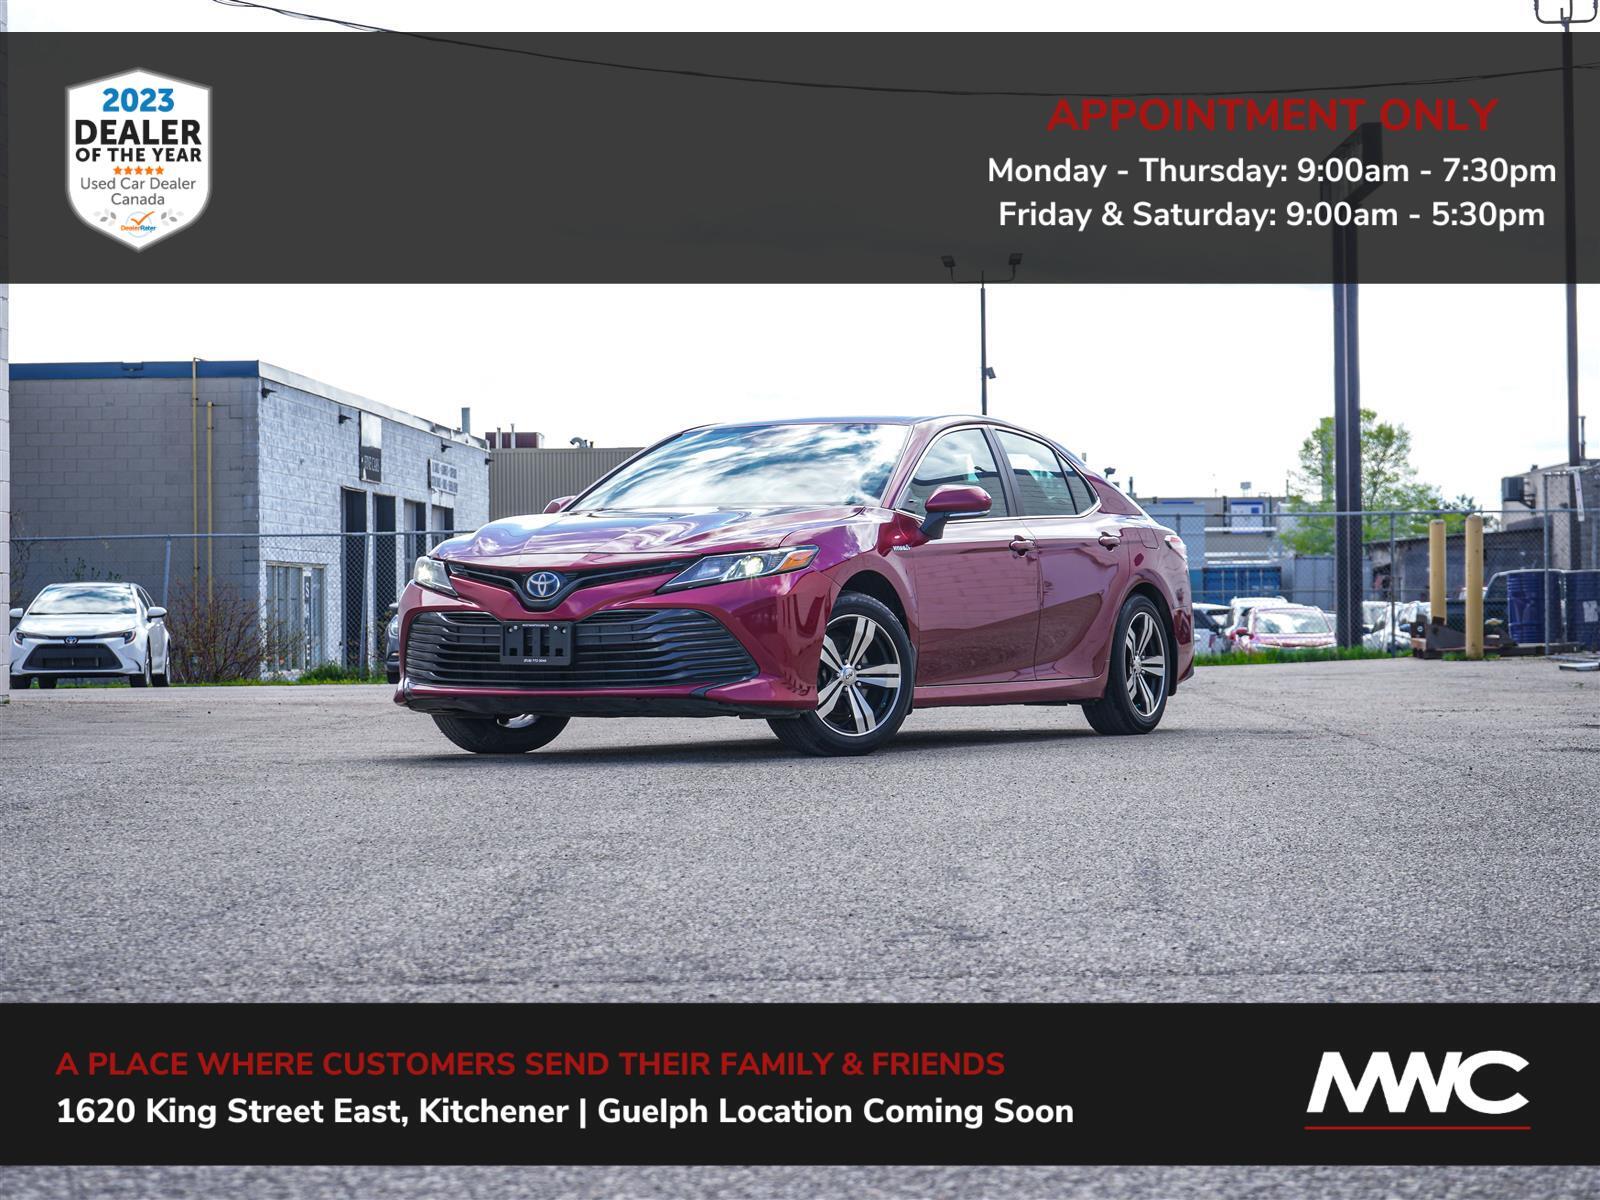 2019 Toyota Camry HYBRID LE | IN GUELPH, BY APPT. ONLY